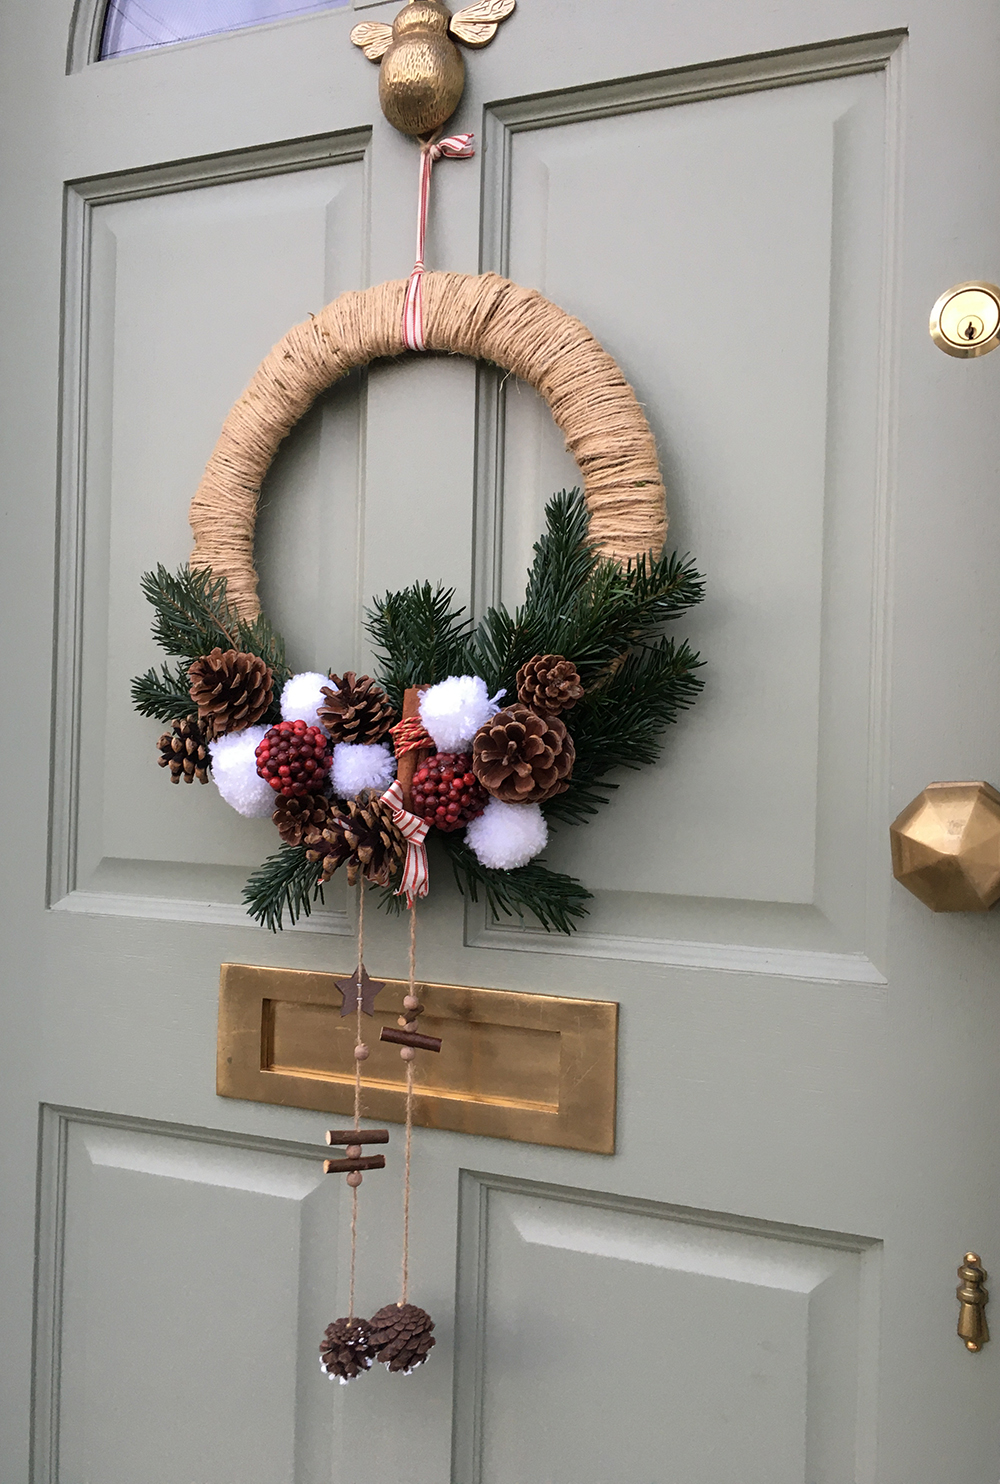 Contemporary Christmas wreath, rope bound hoop with natural evergreen foliage, cones, berries, snowball pom poms